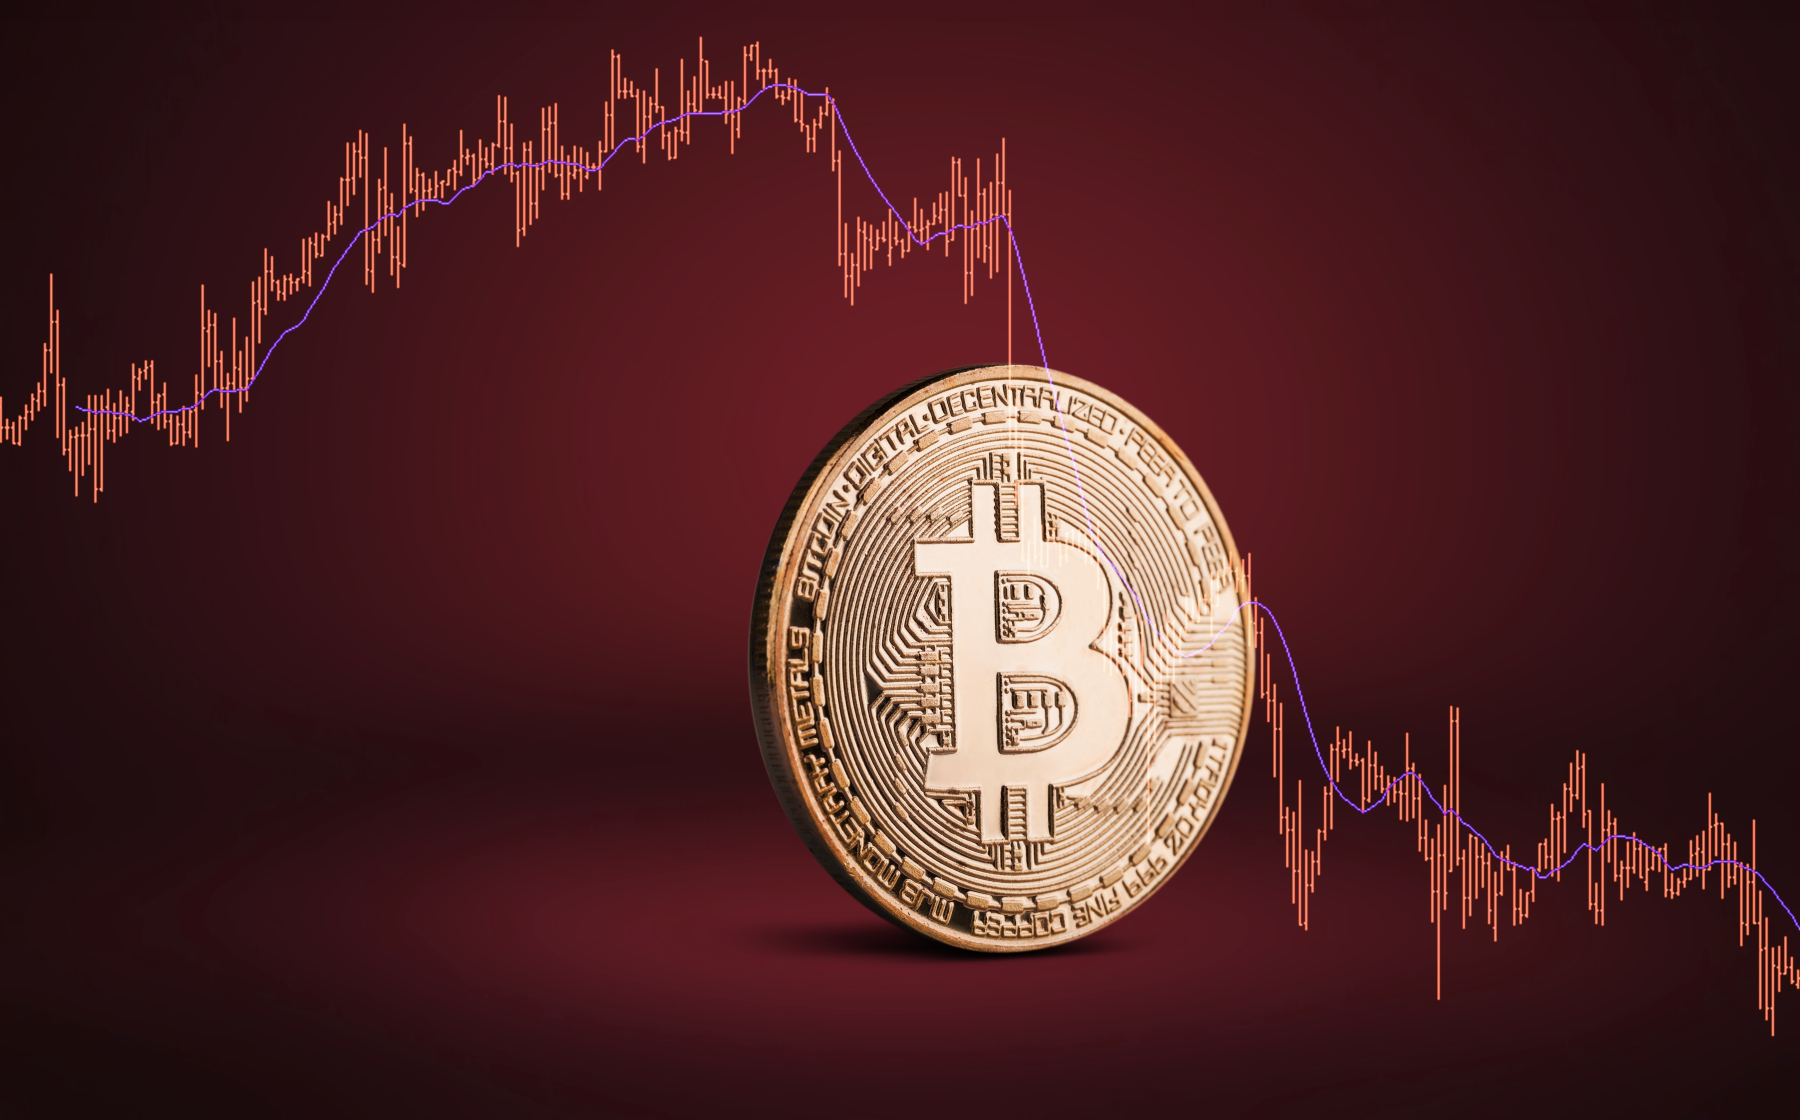 Is Bitcoin going to crash to $10,000?
